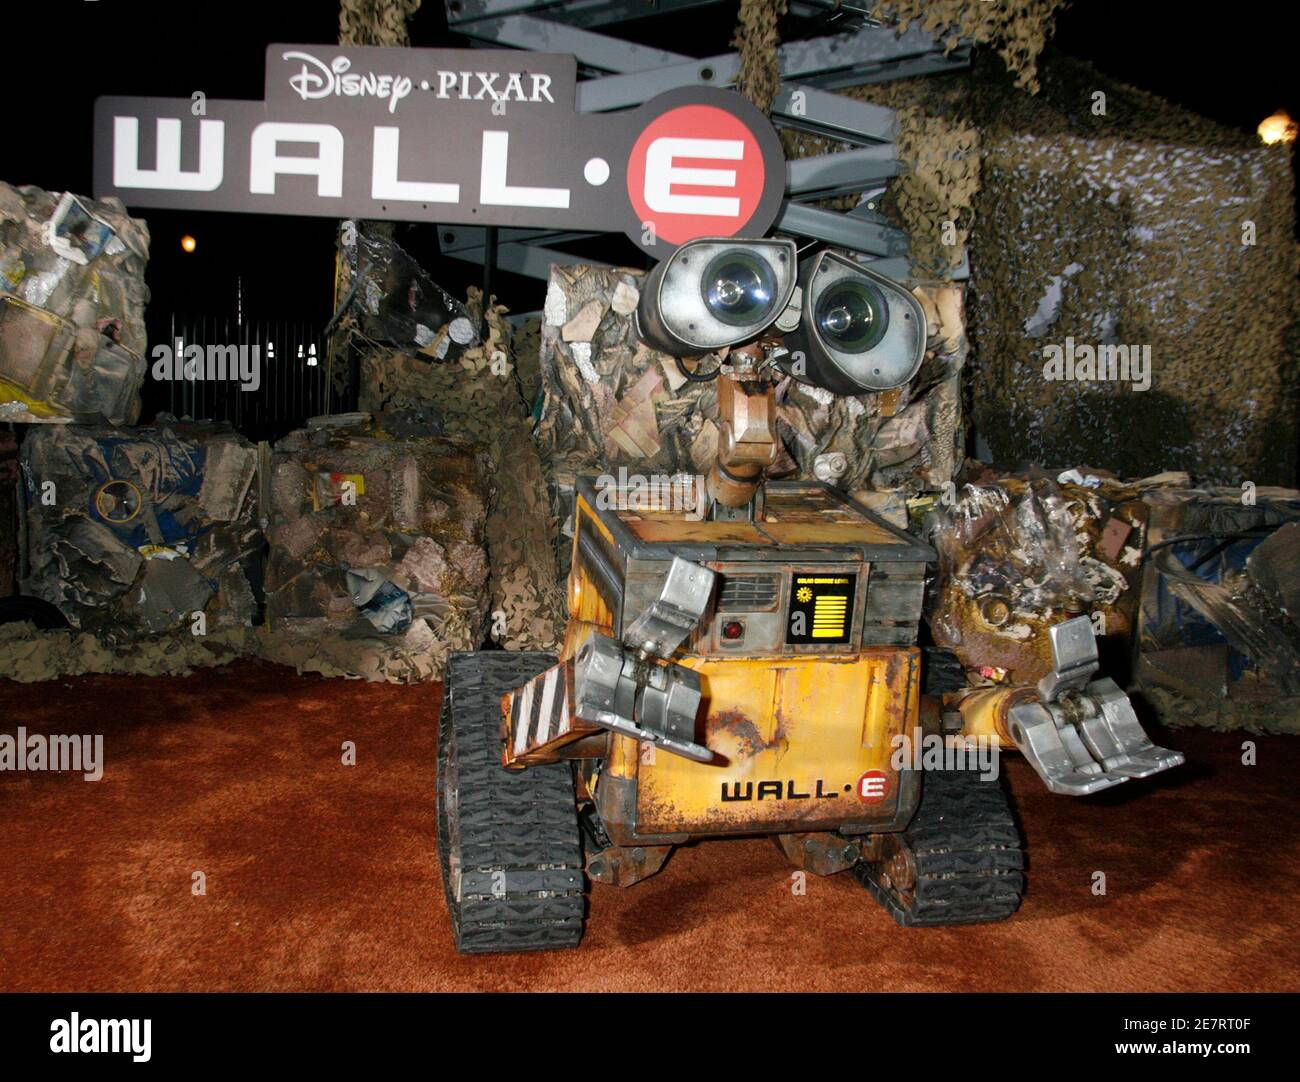 An animatronic robot of the character Wall-E is displayed at the world premiere of Disney-Pixar's film 'Wall-E' in Los Angeles, California June 21, 2008. The film opens June 27.  REUTERS/Fred Prouser                   (UNITED STATES) Stock Photo